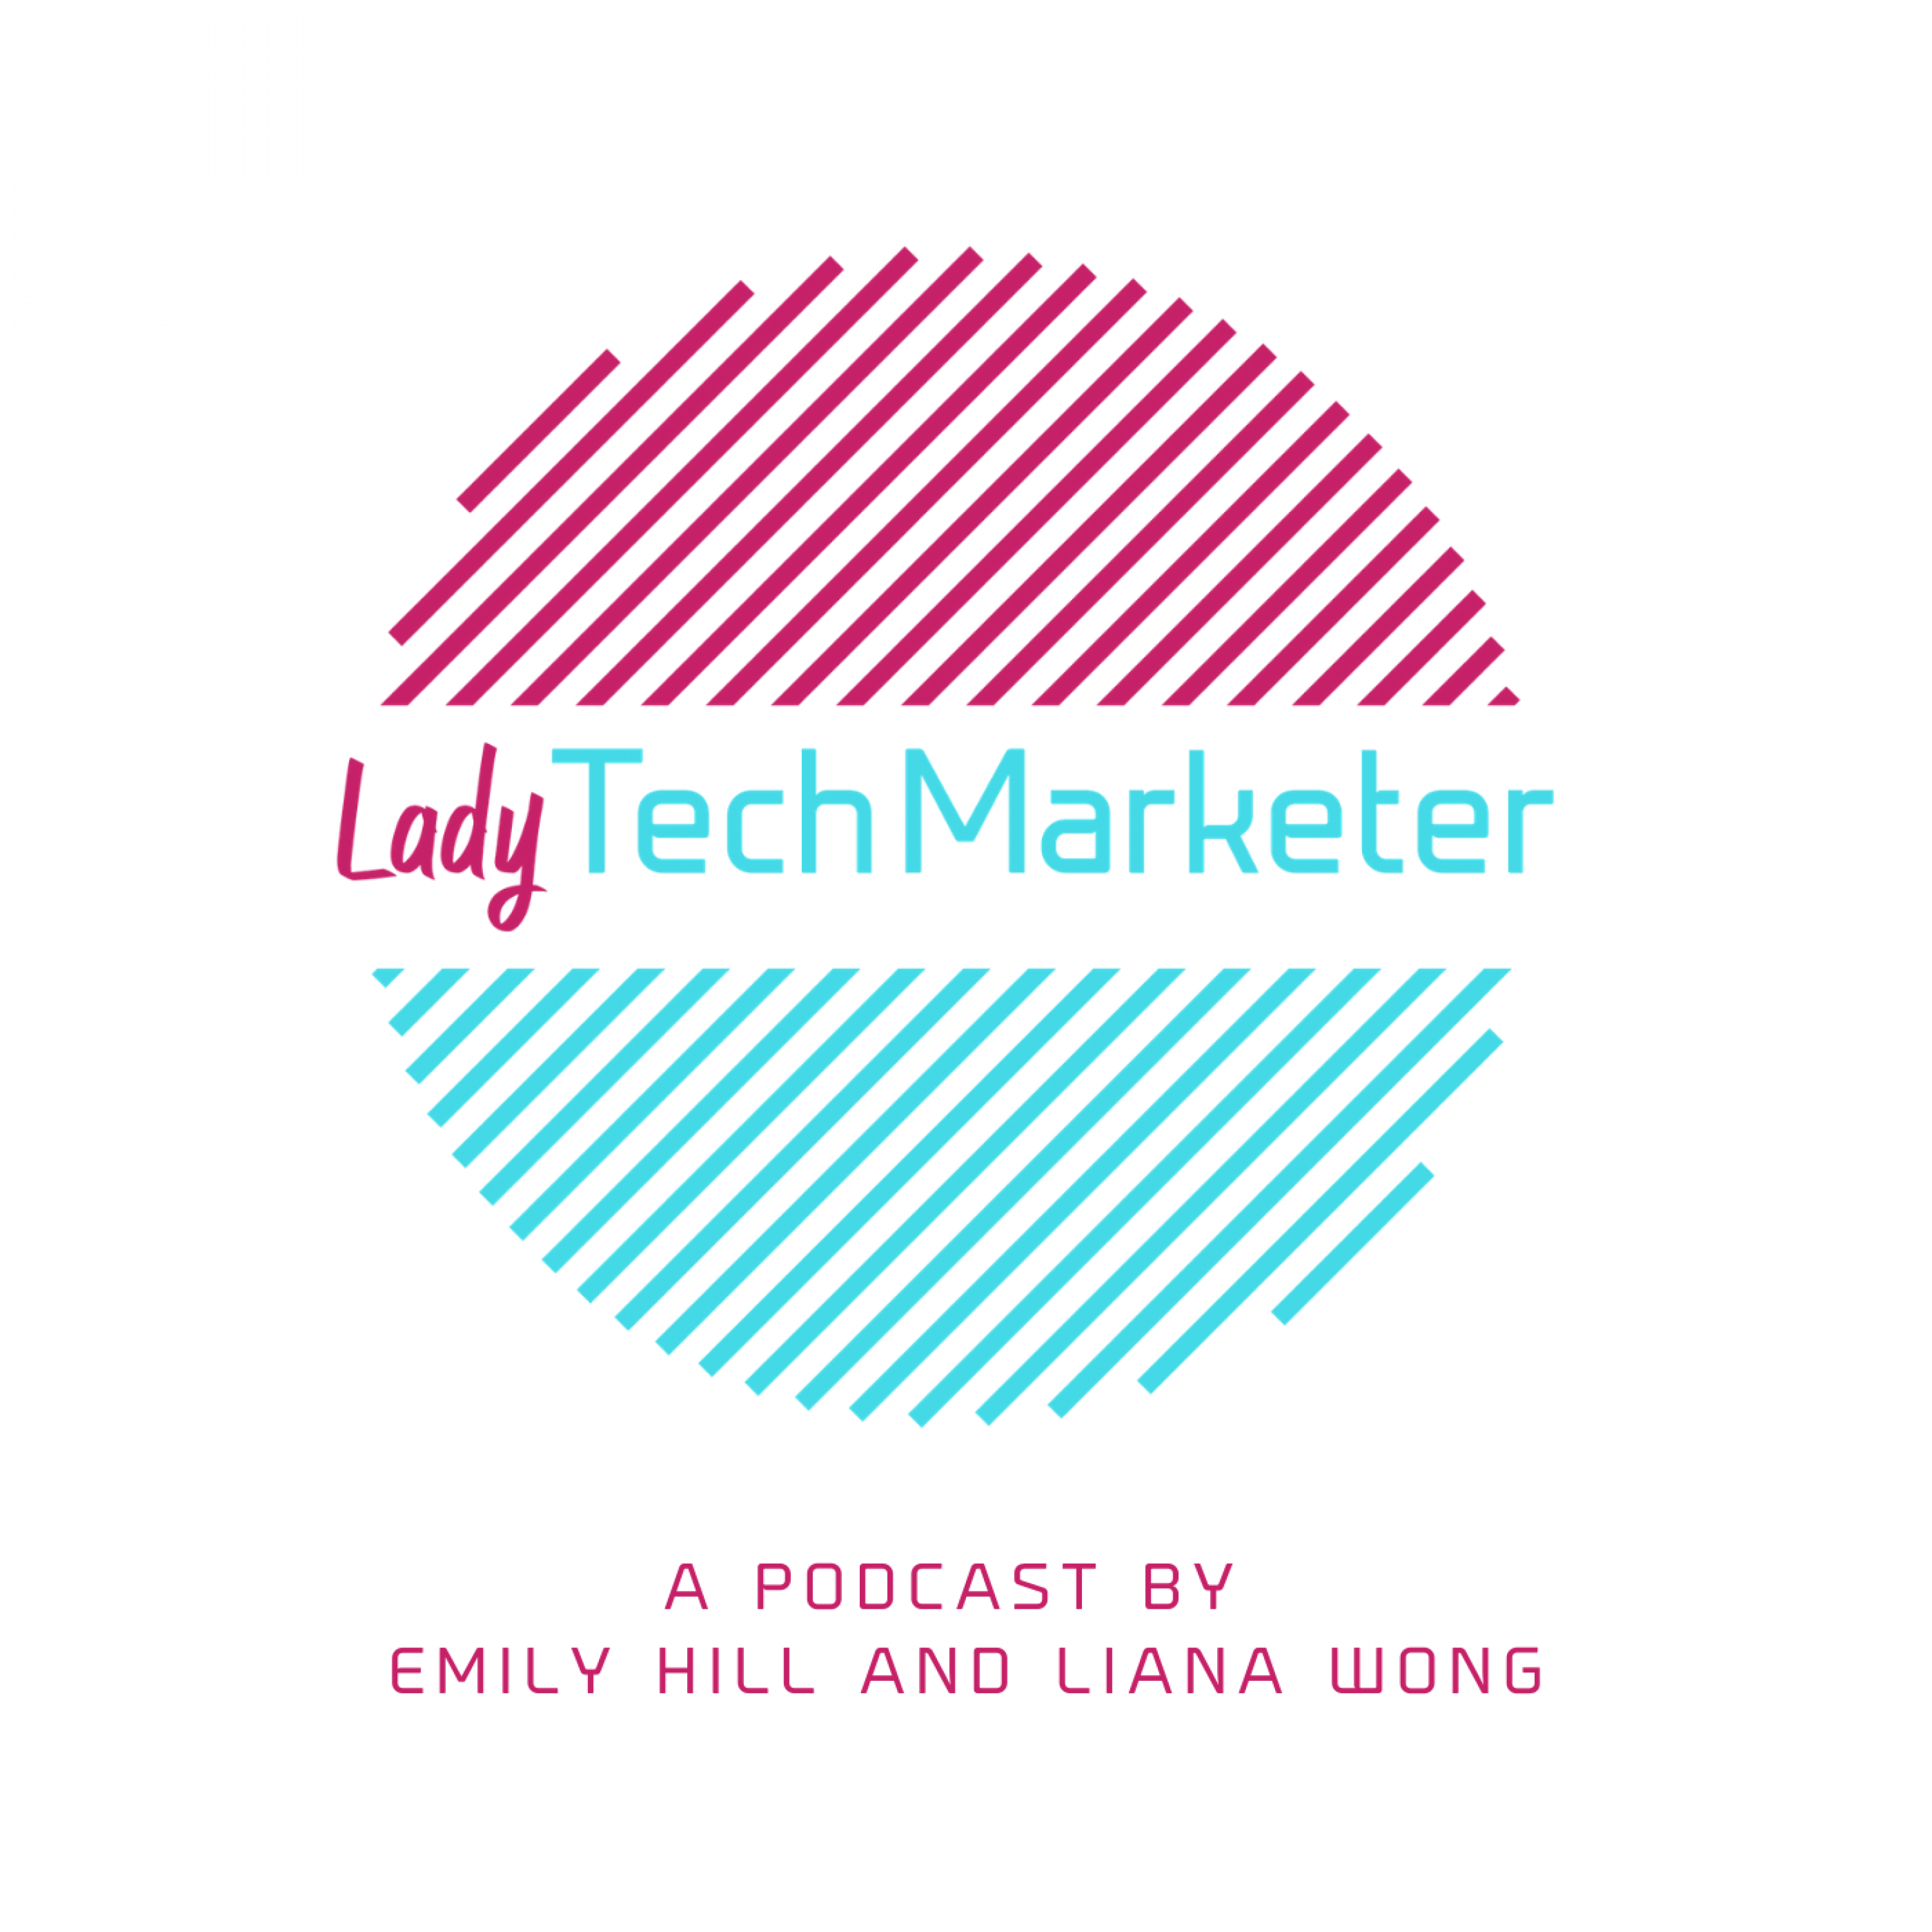 The Lady Tech Marketer Podcast